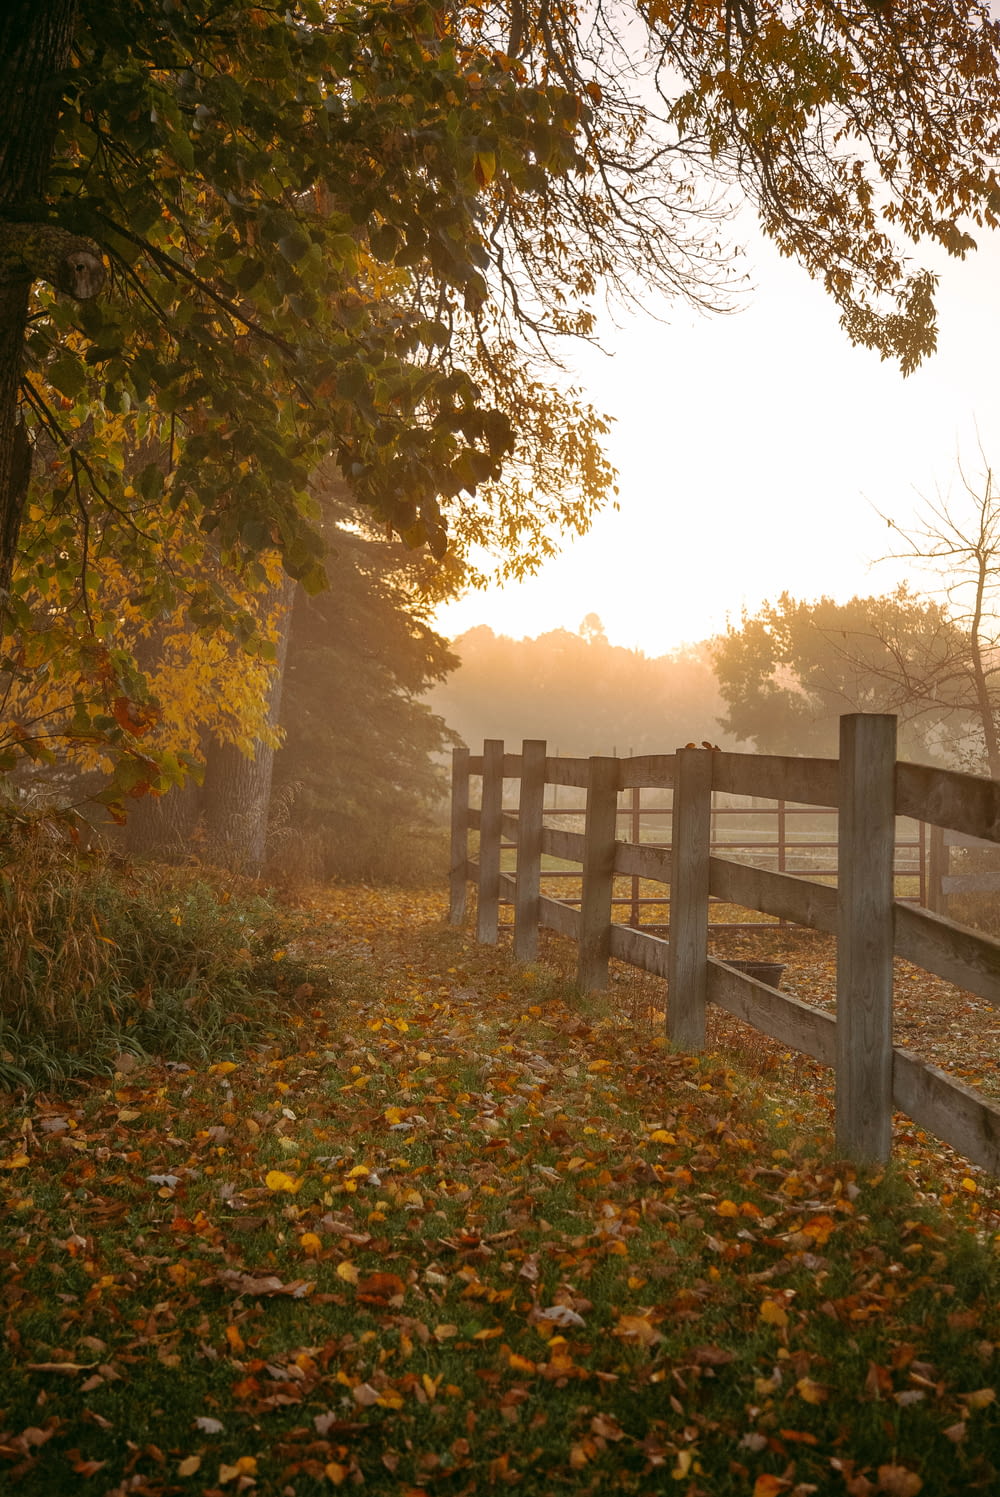 a wooden fence in a field with leaves on the ground